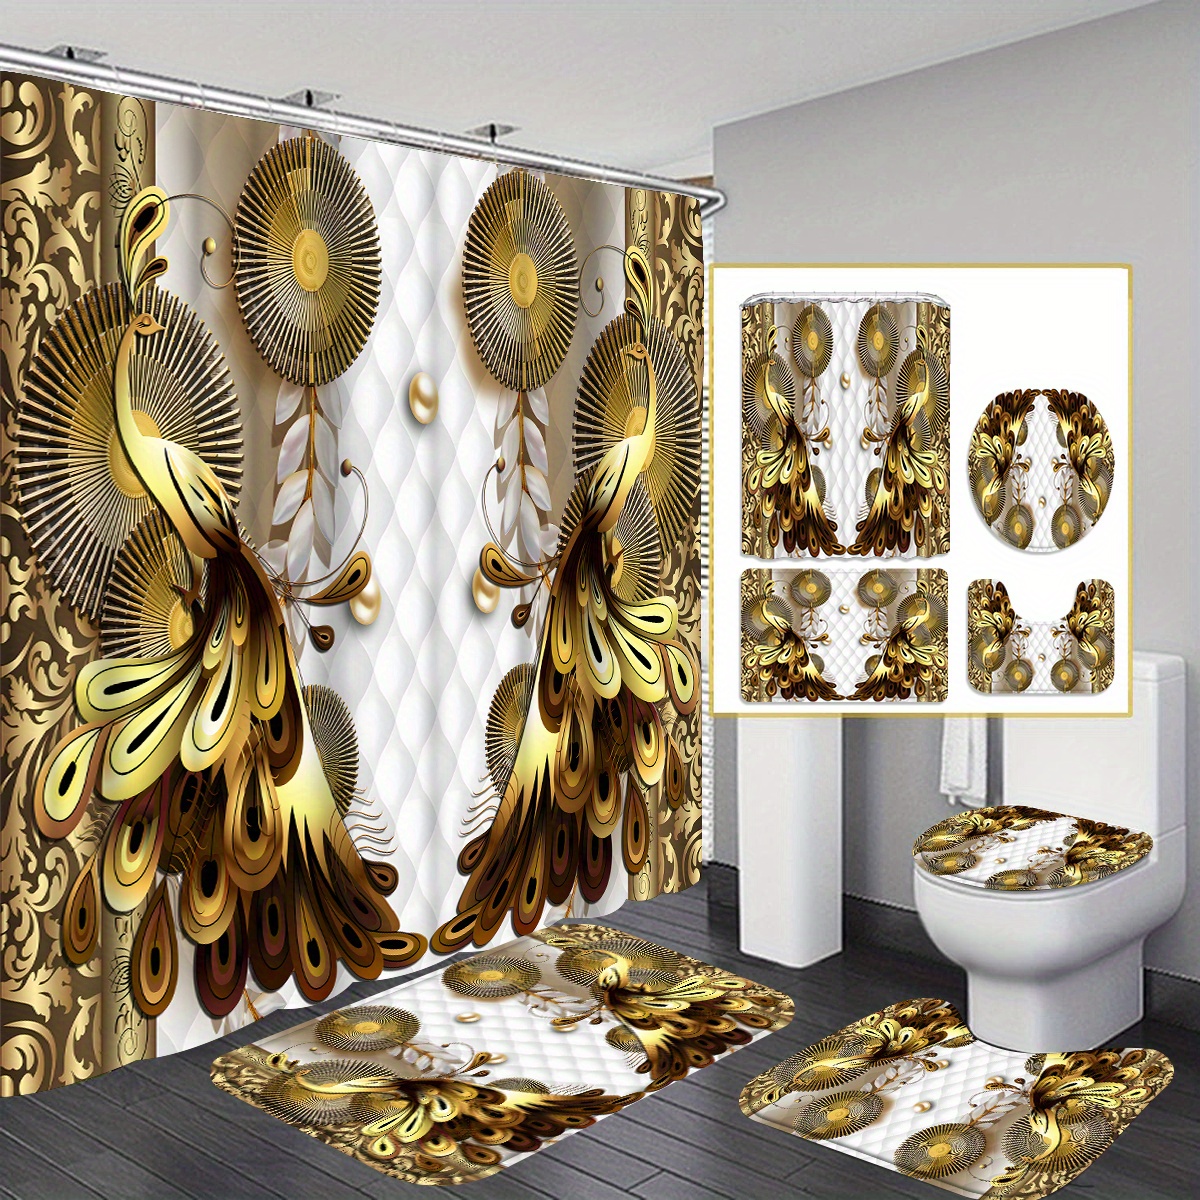 

4pcs The Luxurious Peacock Gate Shower Curtain Gift Modern Home Bathroom Decoration Curtain And Toilet Floor Mat 3-piece Set With 12 Shower Curtain Hooks